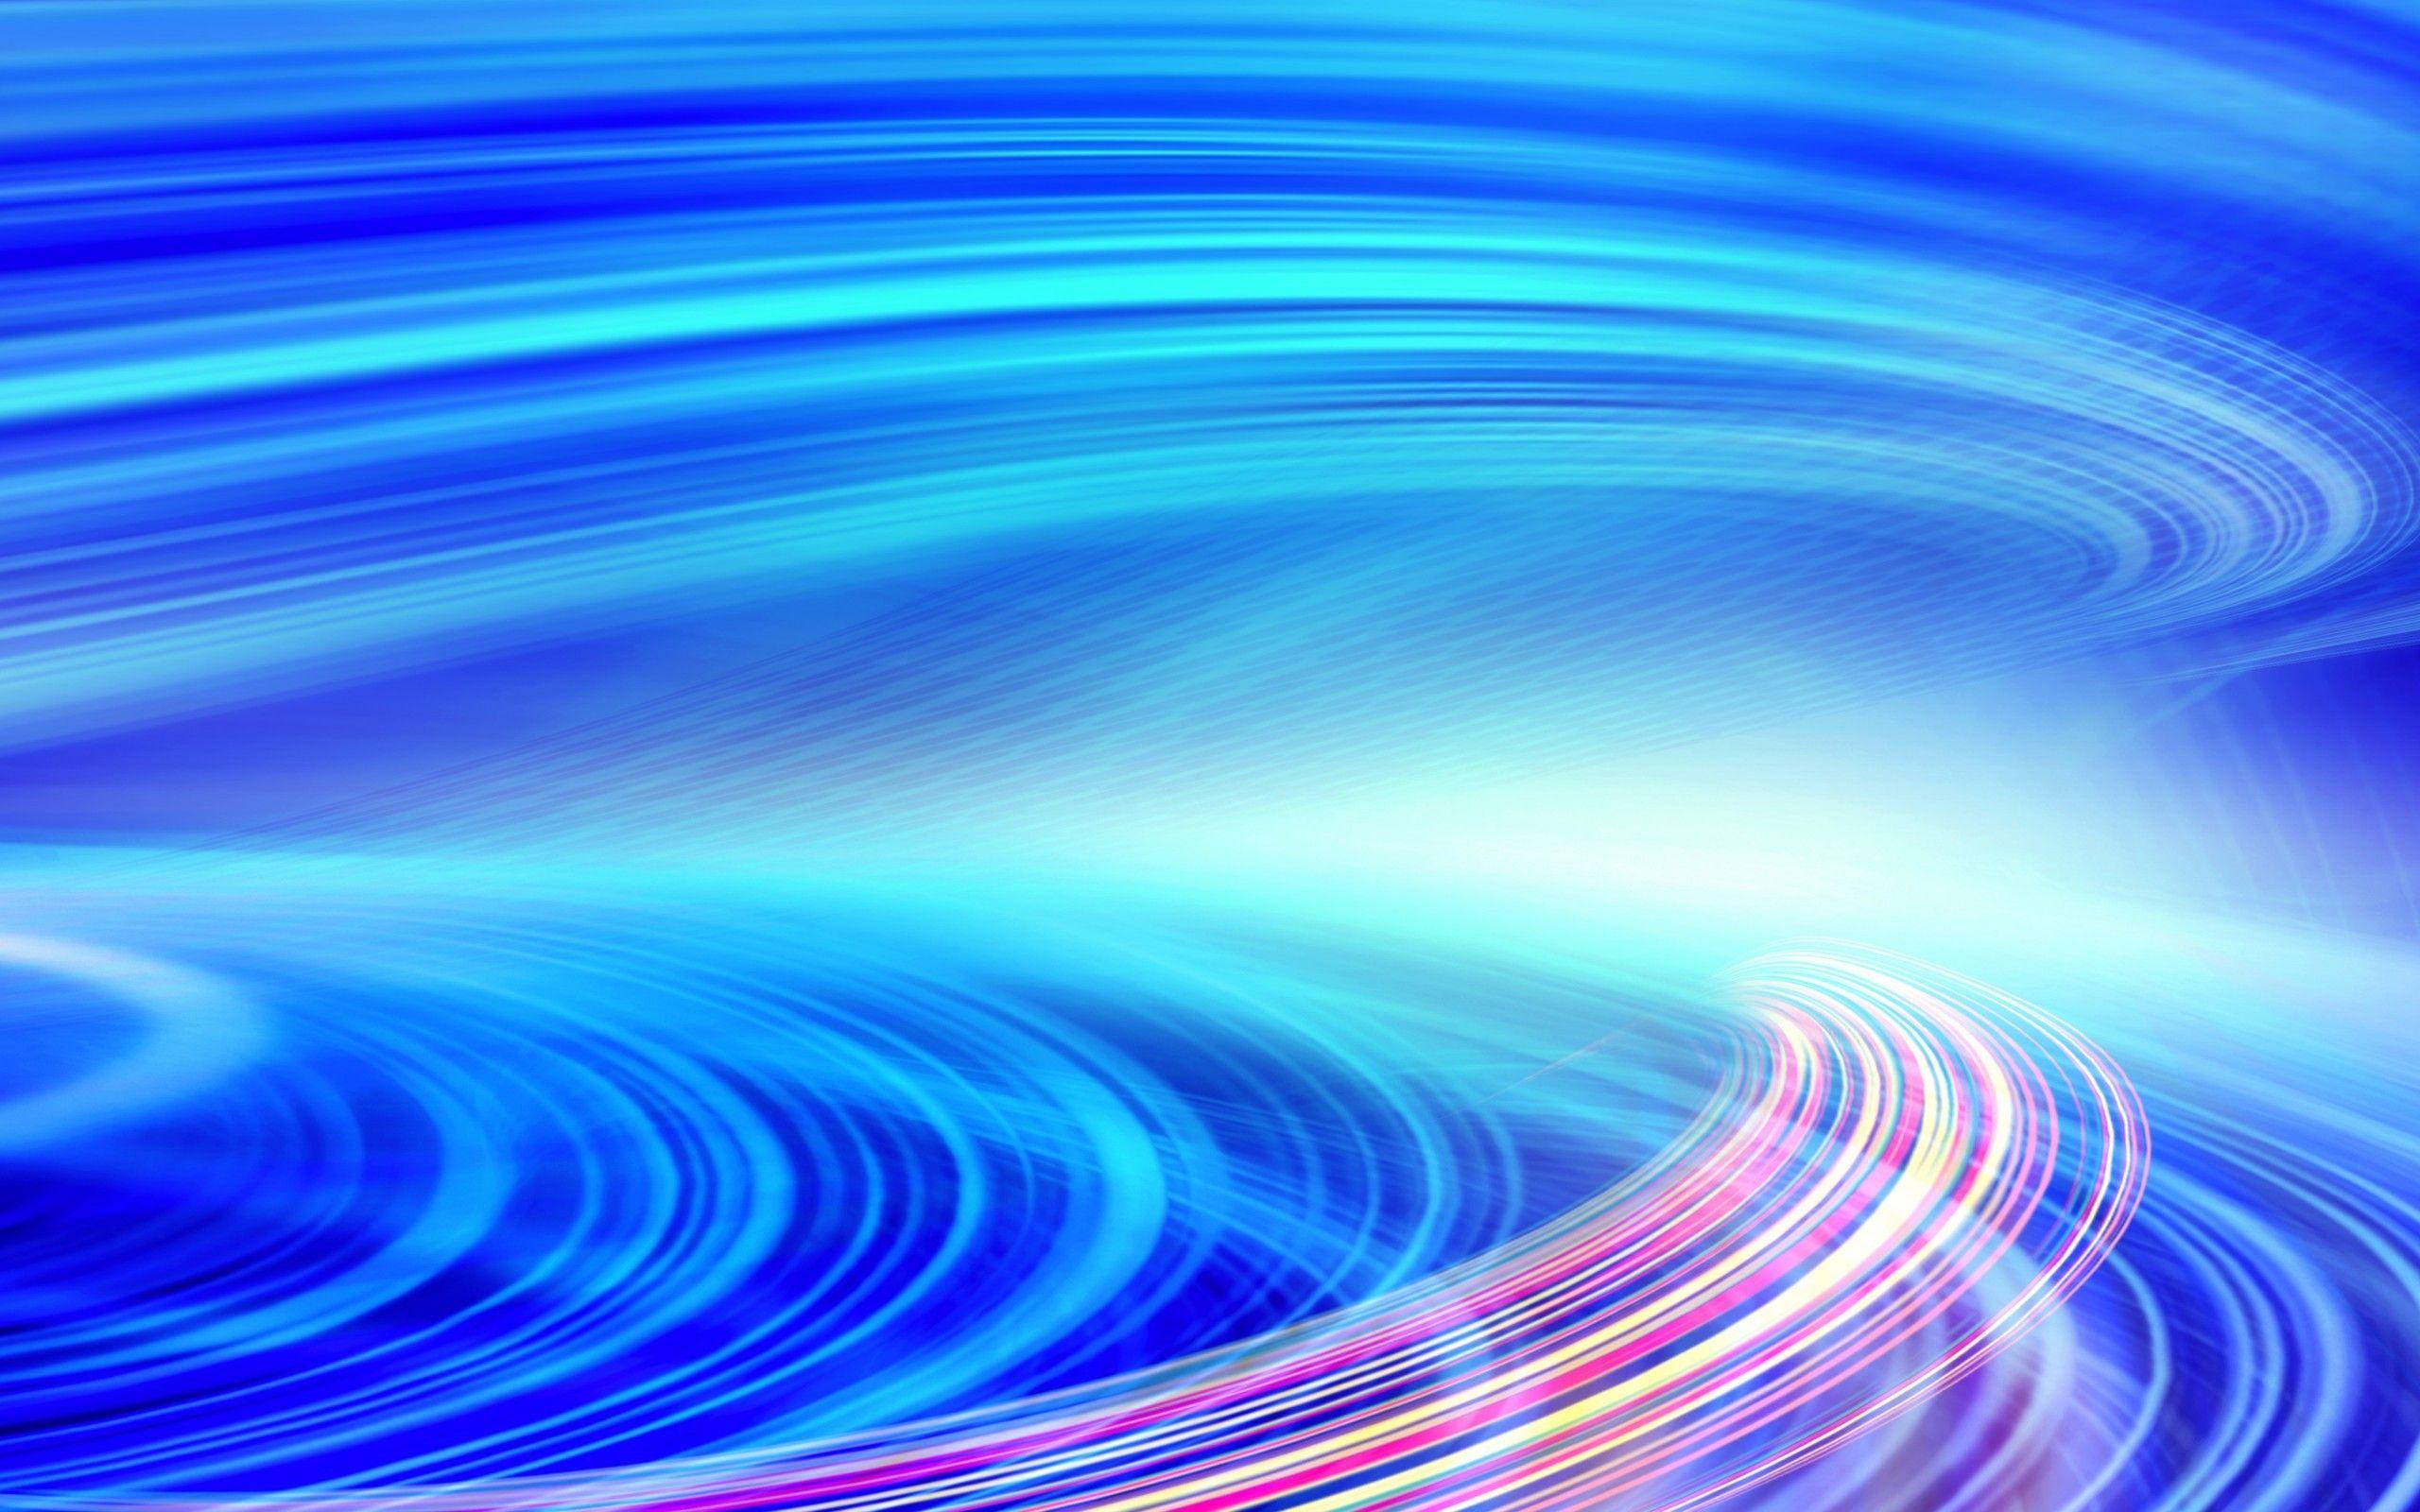 Abstract Blurred Blue Lines Curves Wallpaper and Free Stock